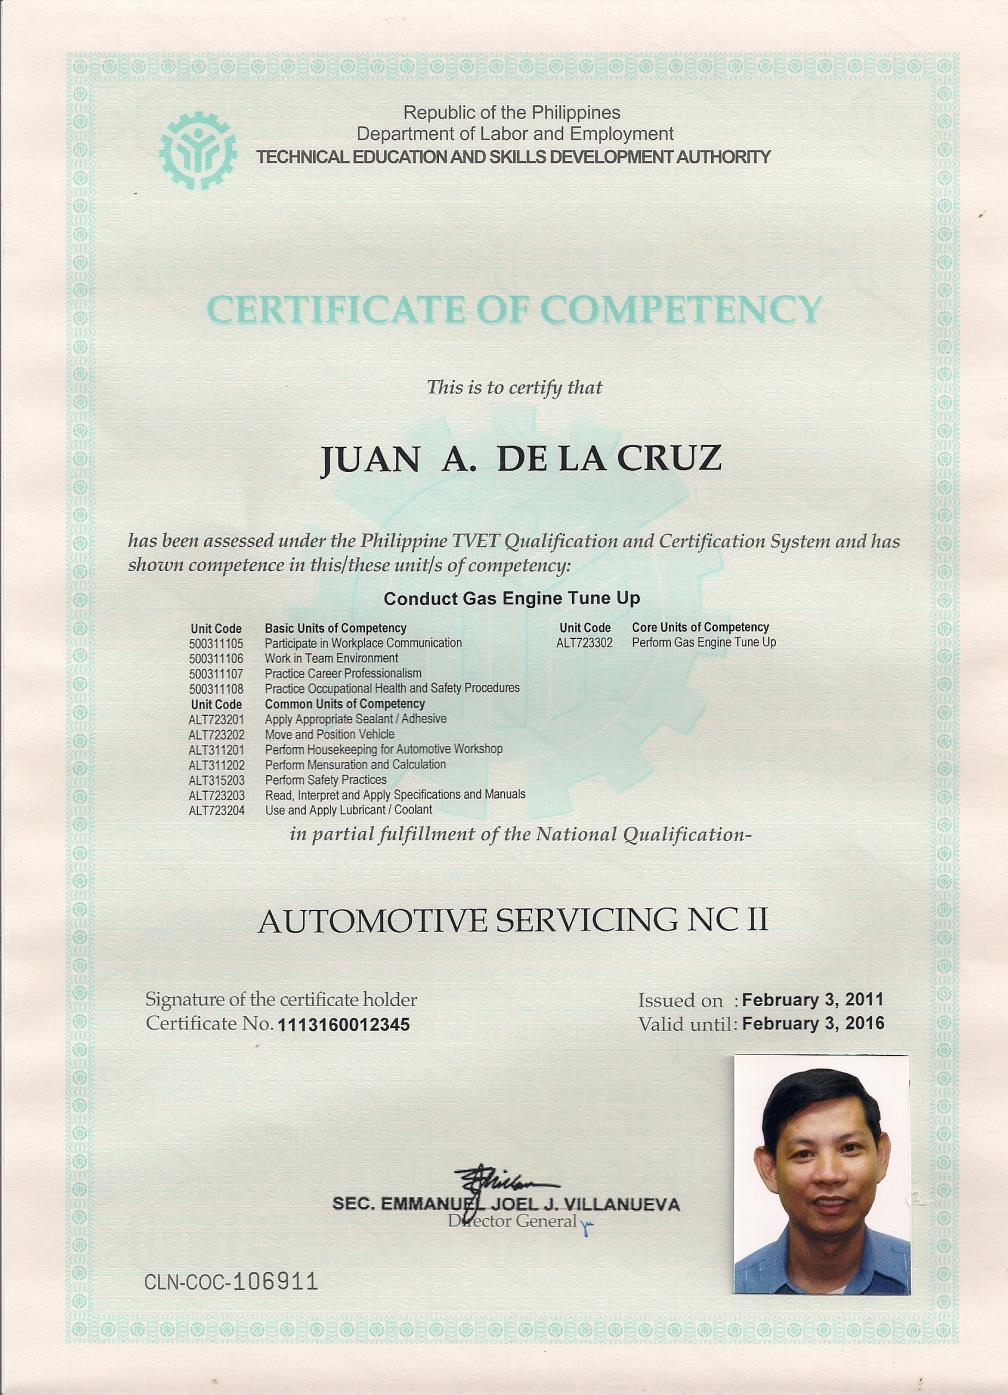 A Certificate of Competency is issued to individuals who have